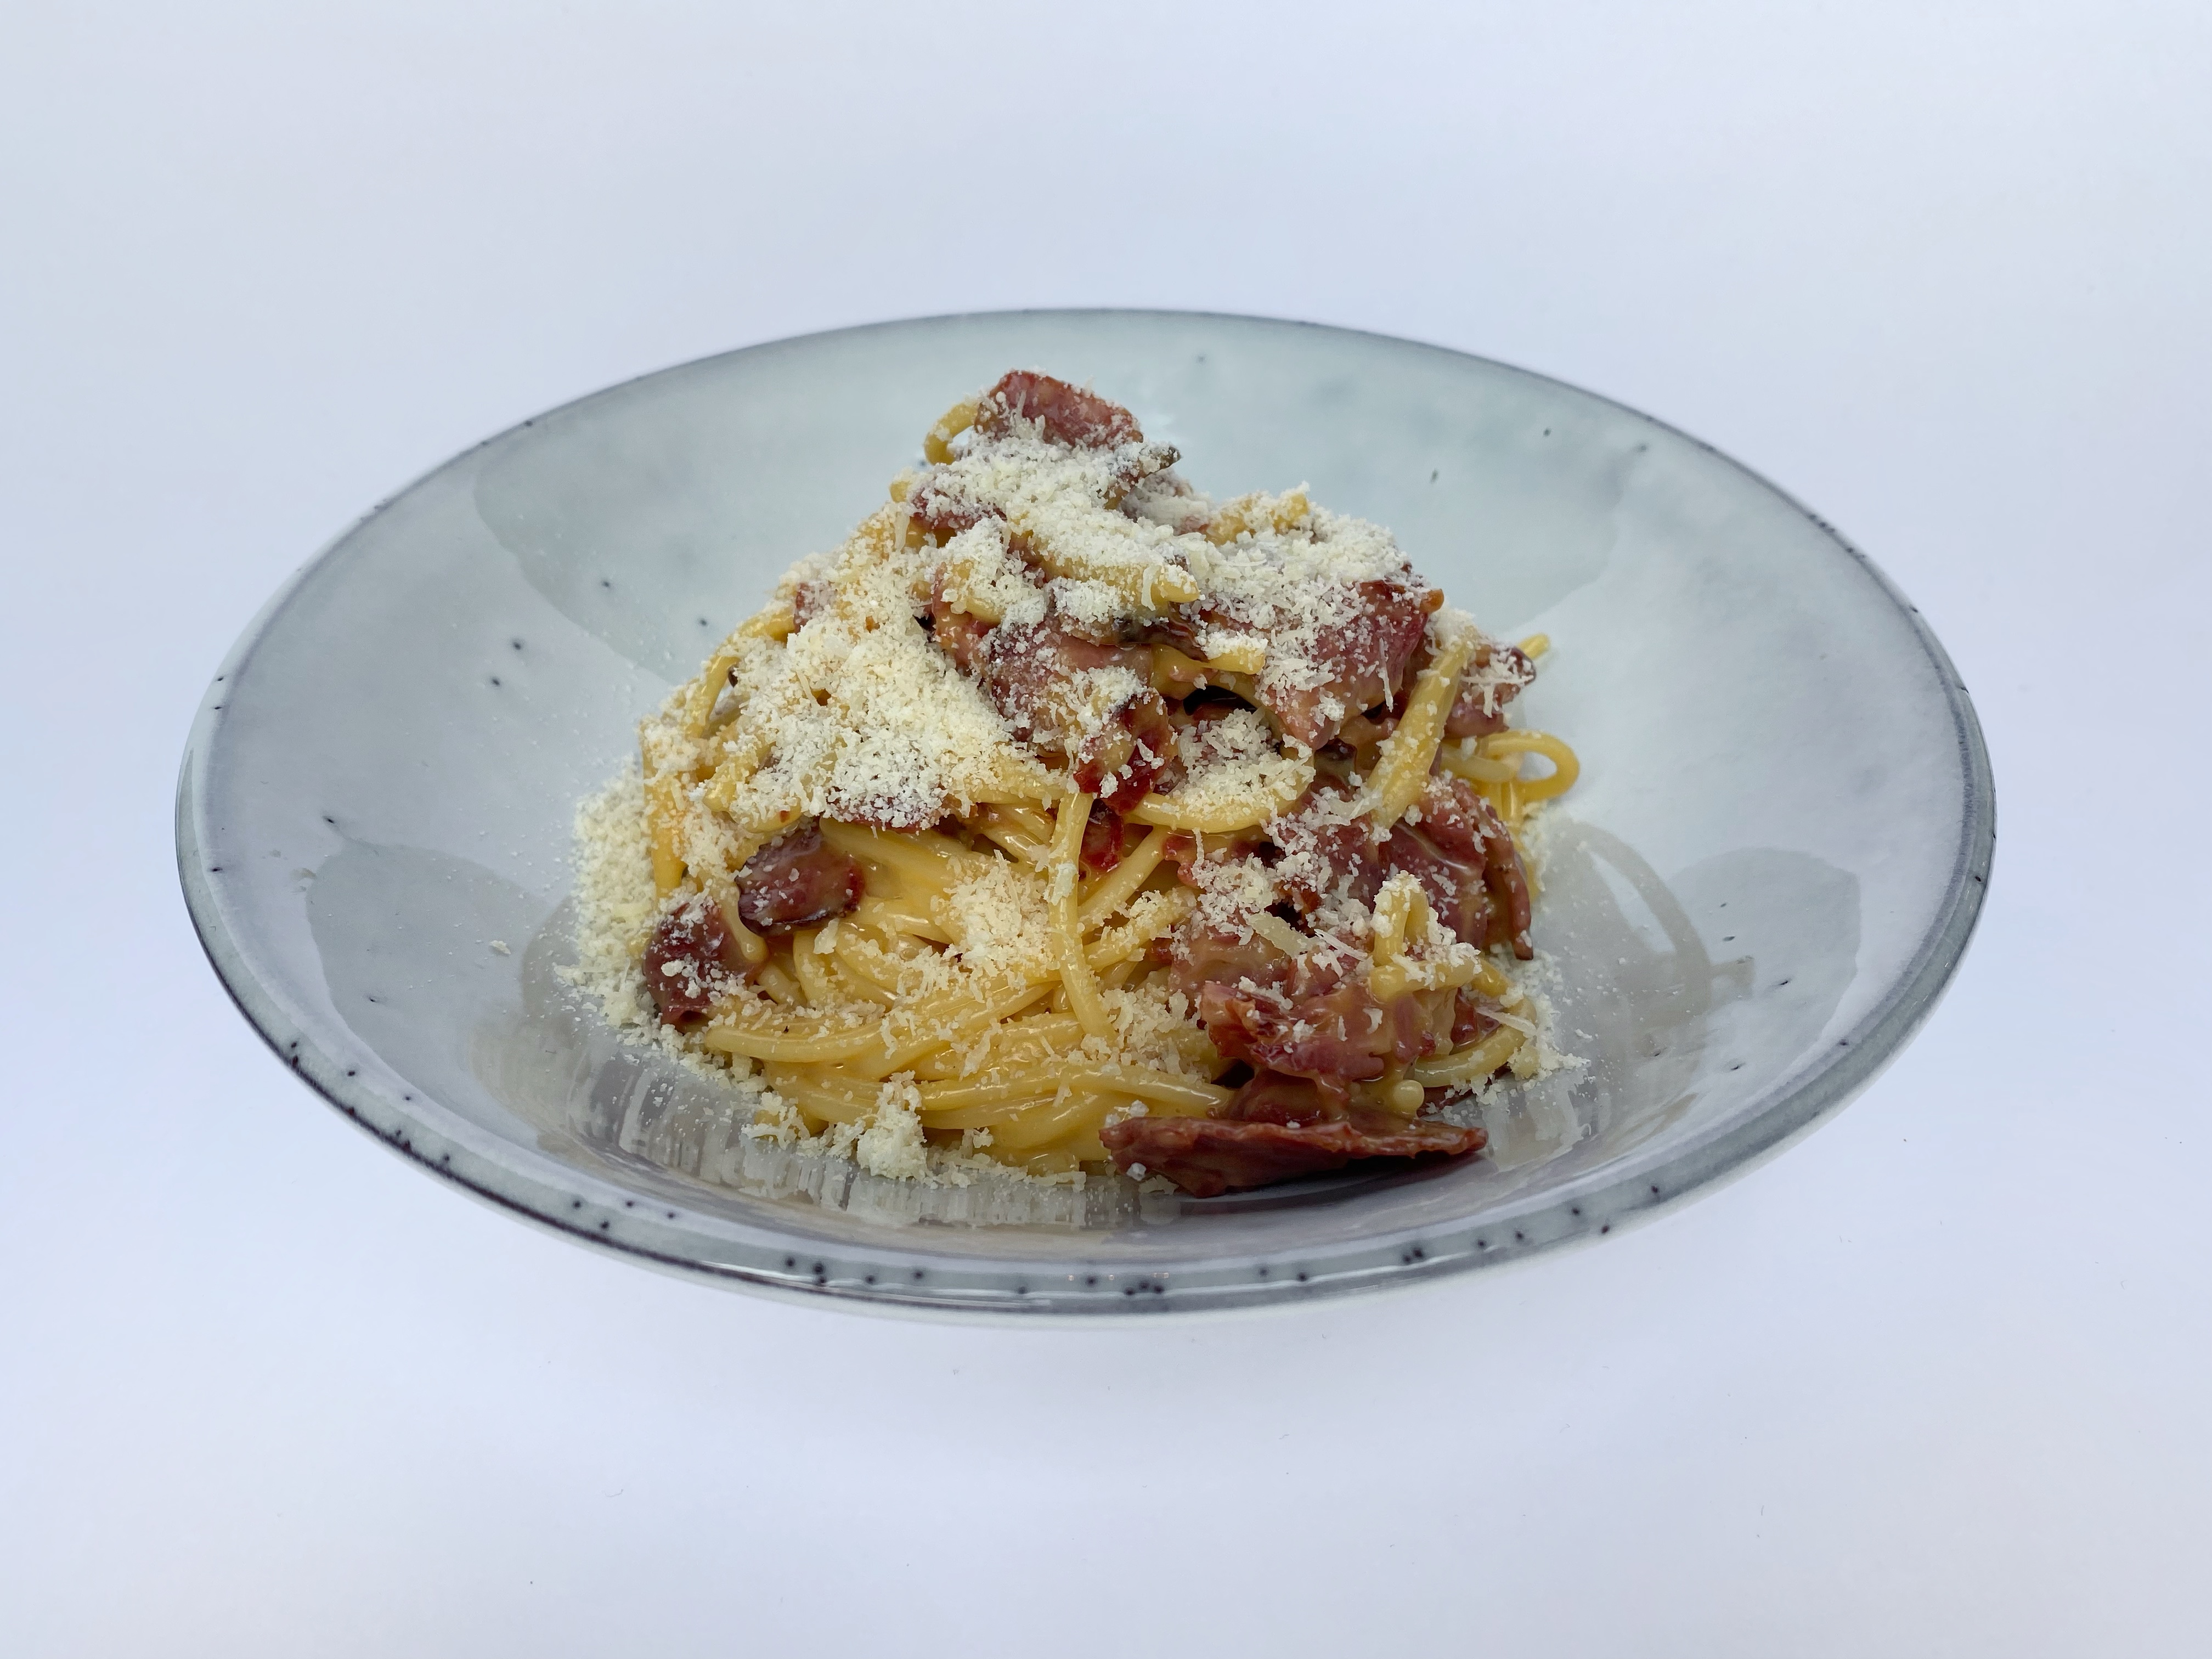 <span color-type="color" style="color: #000000;">Spaghetti carbonara with beef bacon</span>